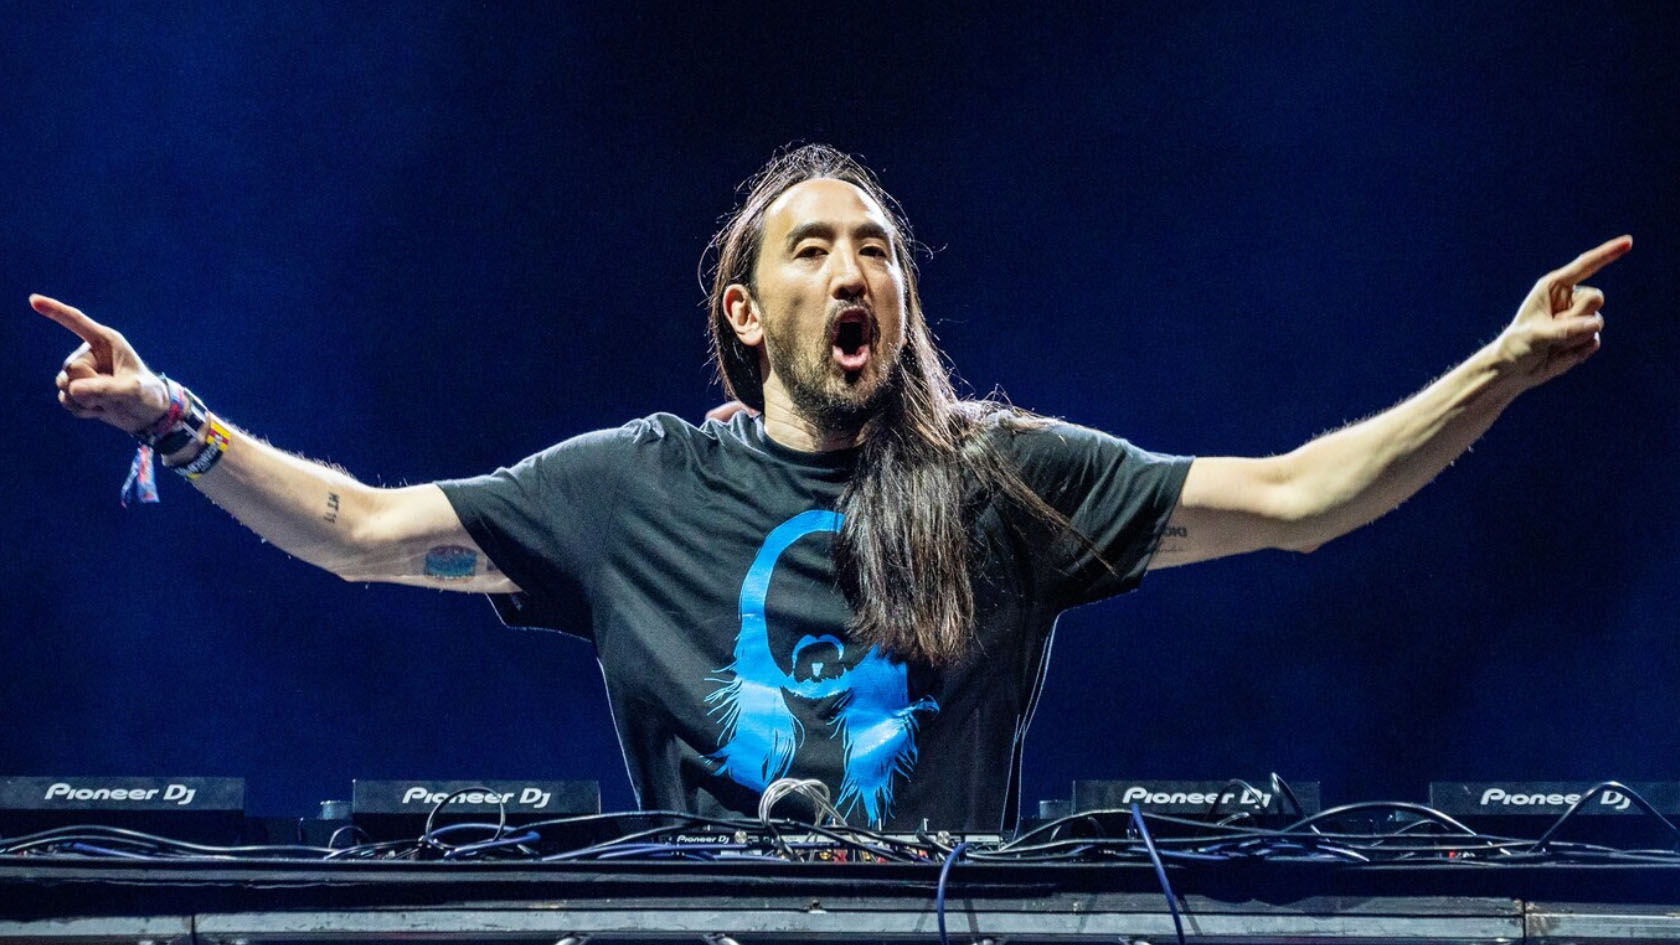 Steve Aoki Set To Make History As First DJ To Go To The Moon